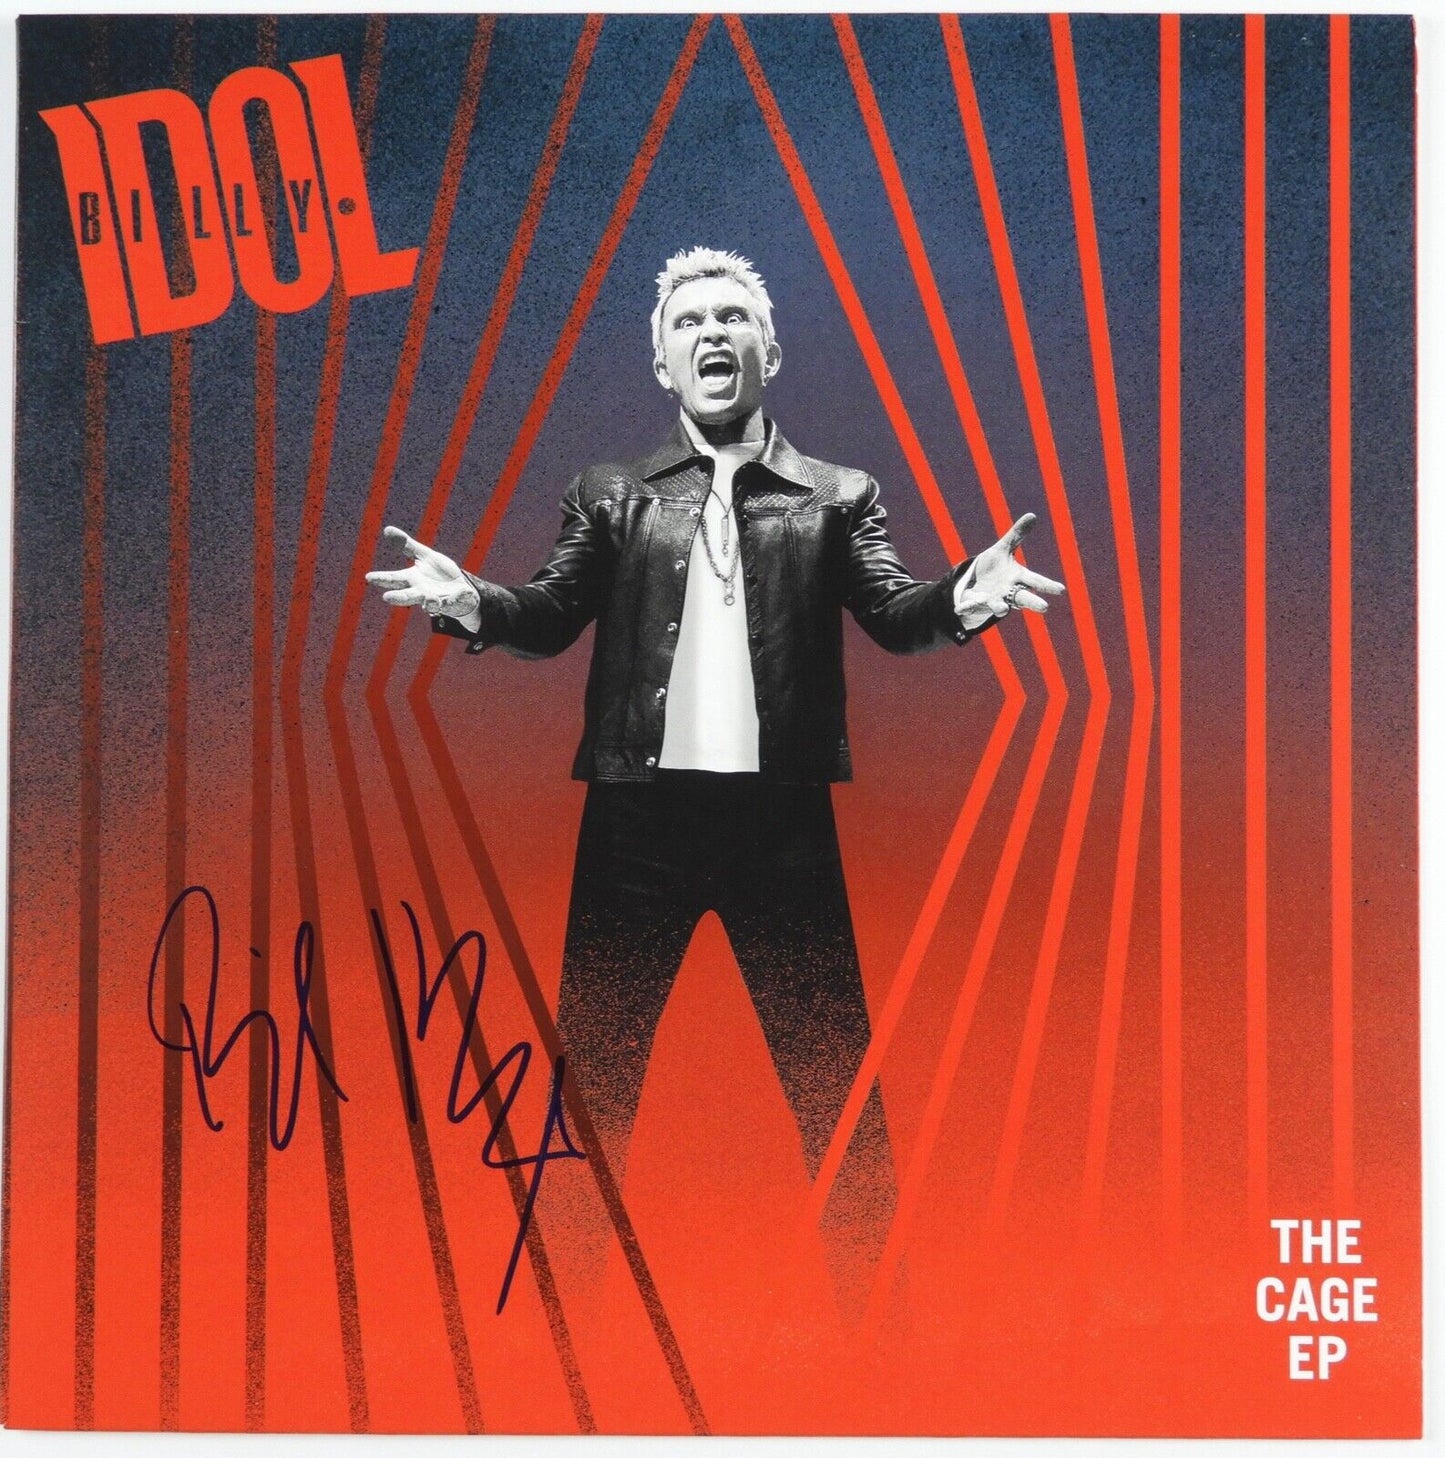 Billy Idol Signed JSA Autograph Album Vinyl Record The Cage EP